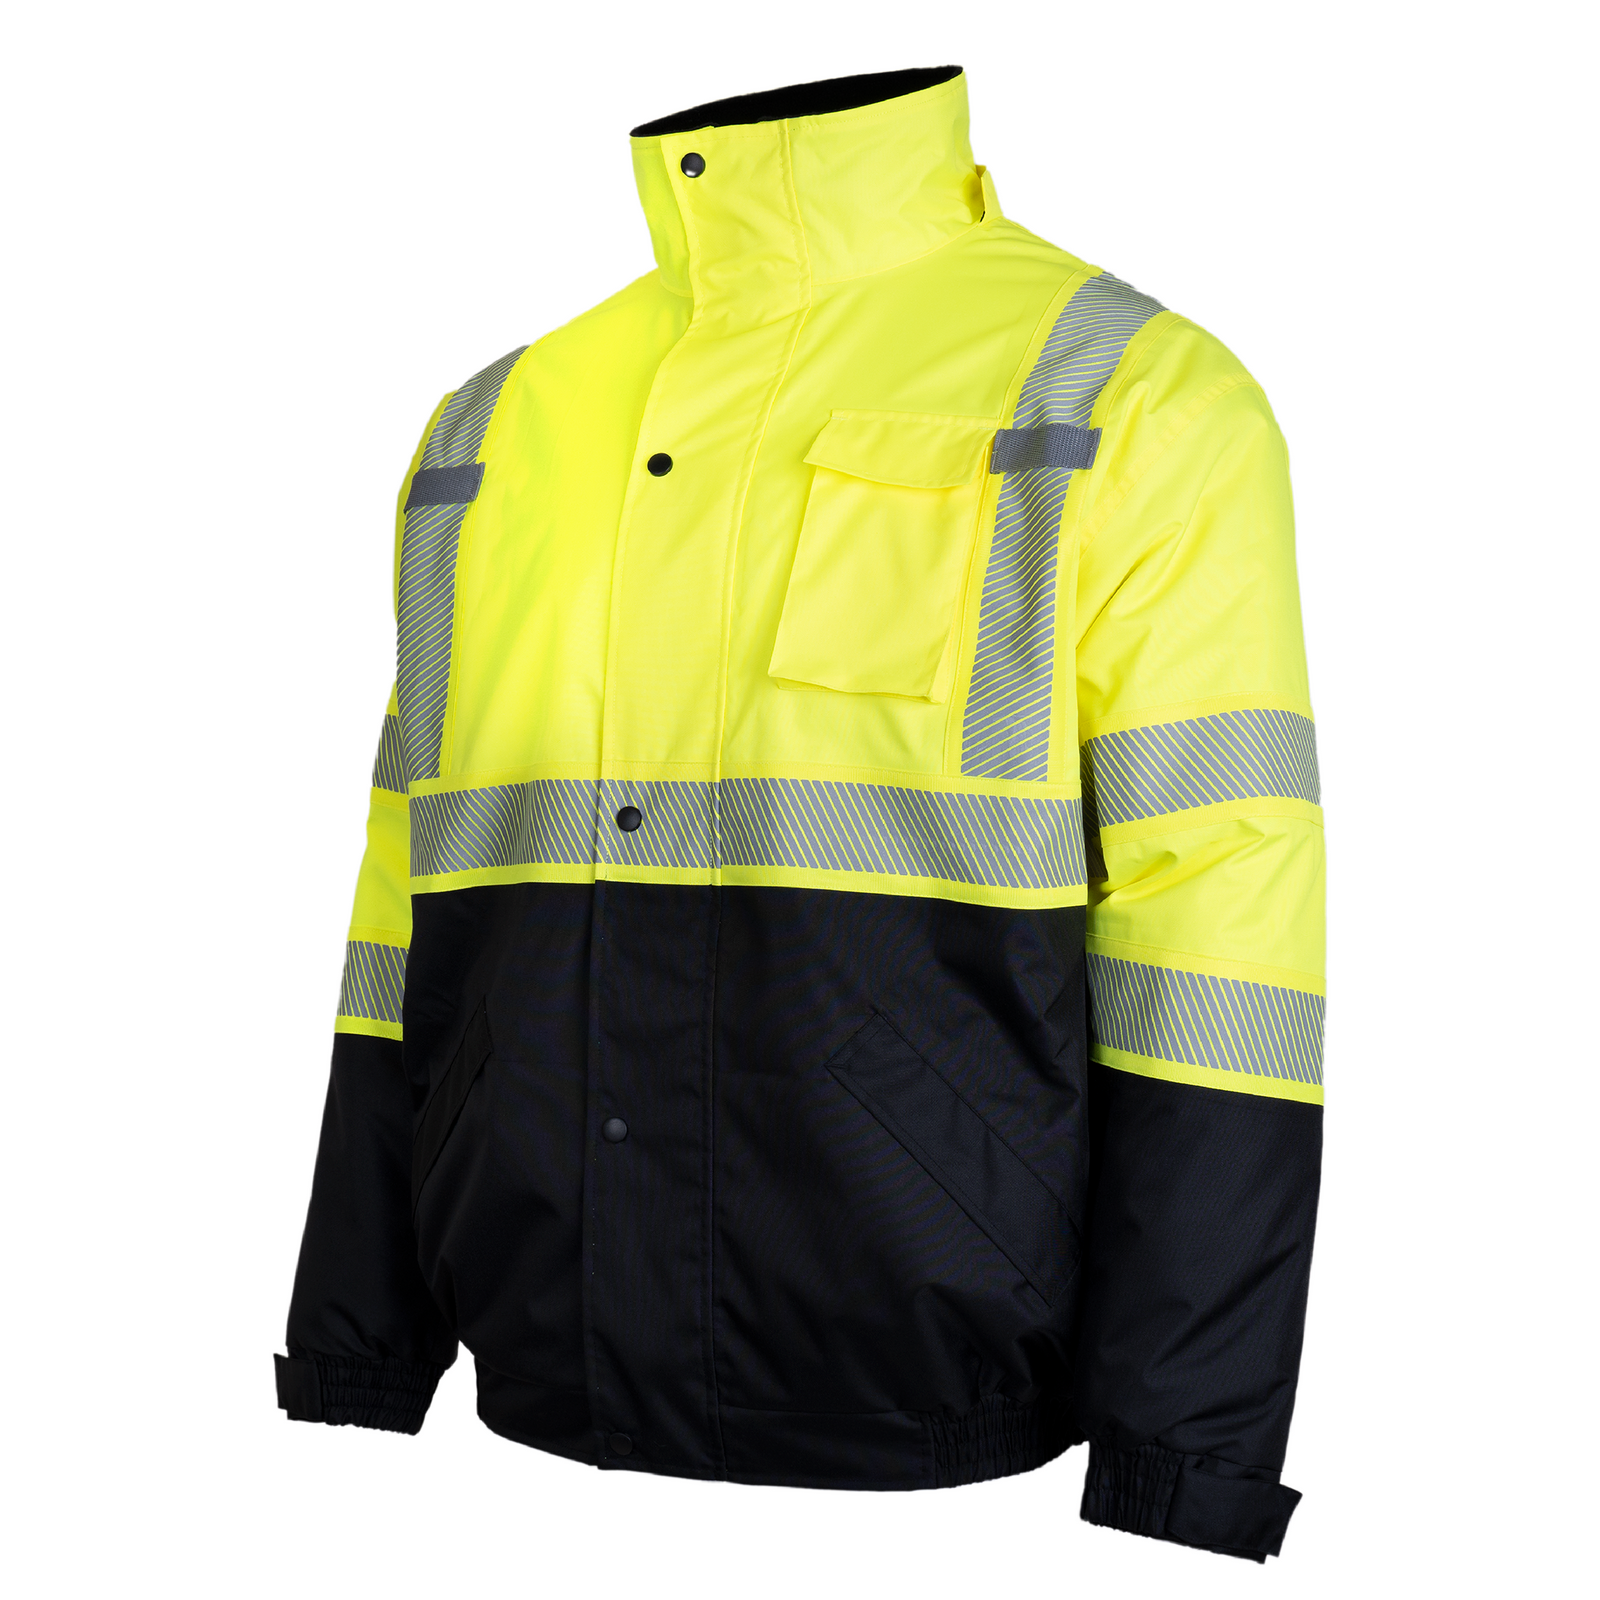 Men's Winter Safety Jackets Reflective With 3M Reflective Stripes Waterproof  Jacket Work Wear ANSI/ISEA 107 Class 3